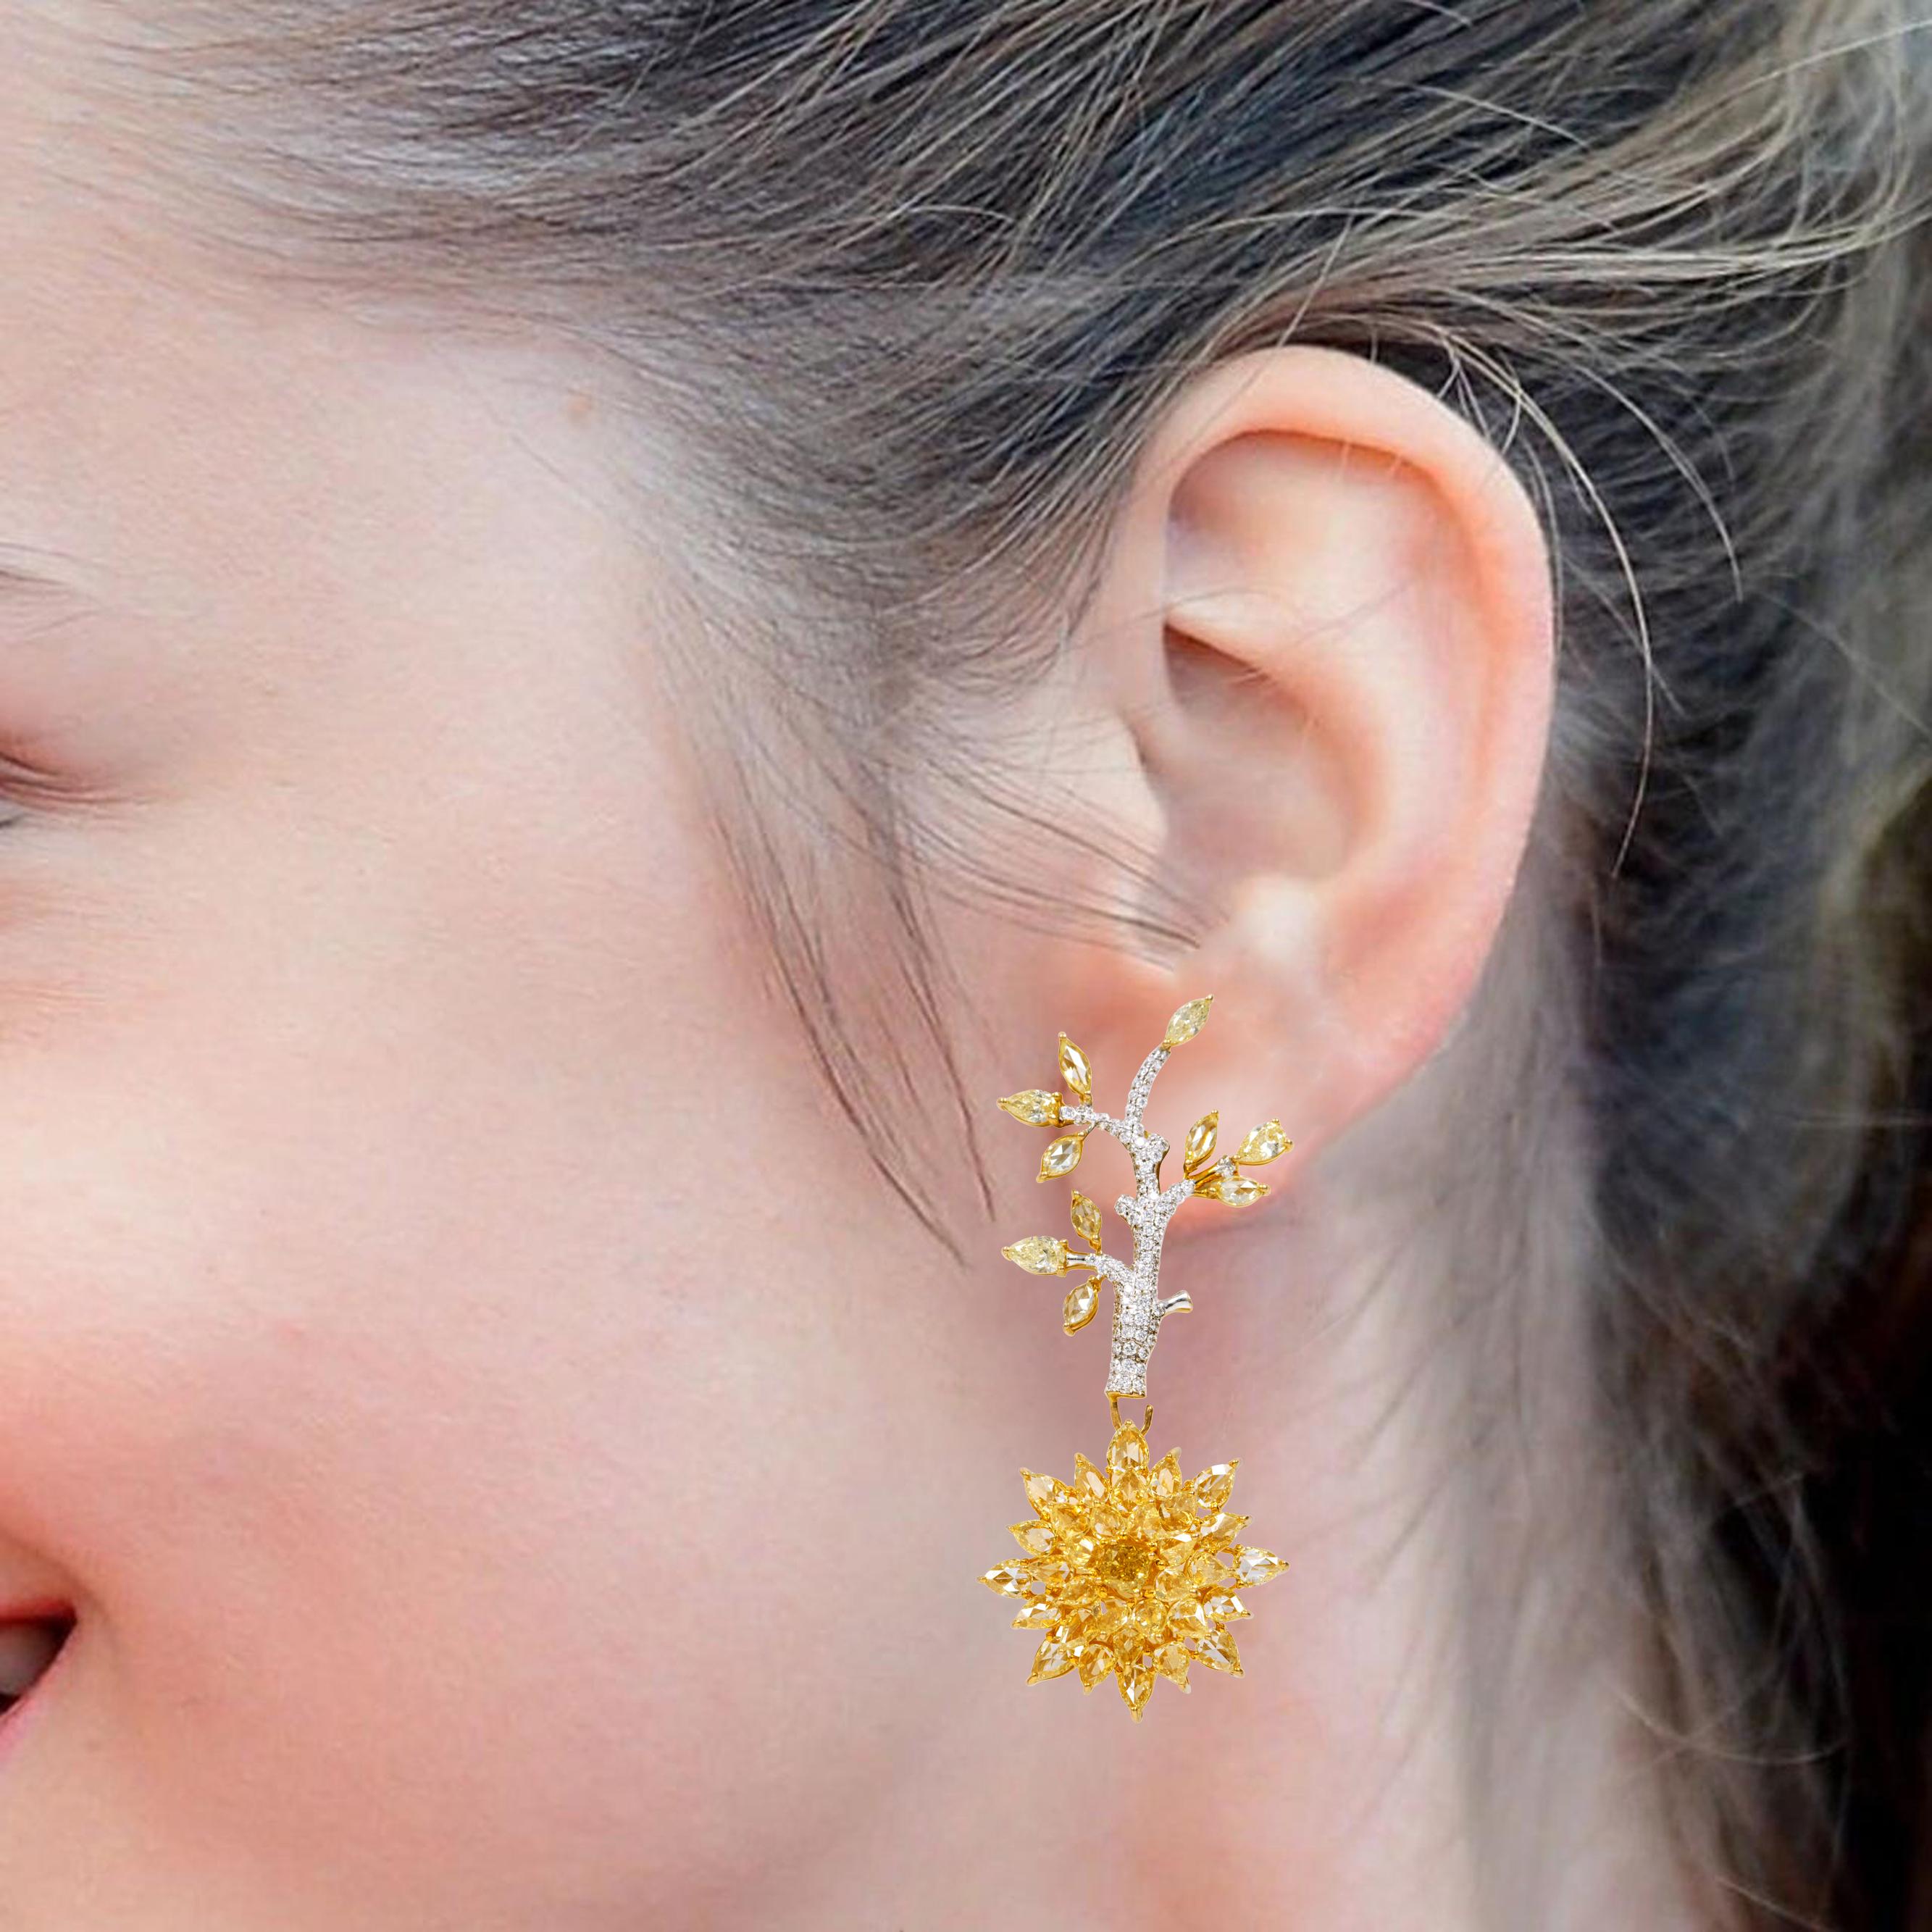 18 Karat Gold 12.86 Carat Fancy Yellow and White Diamond Two-Way Dangle and Stud Earrings

Immerse yourself in the allure of our 12.86 Carat Fancy Yellow and White Diamond Two-Way Dangle and Stud Earrings—an extraordinary pair that harmoniously